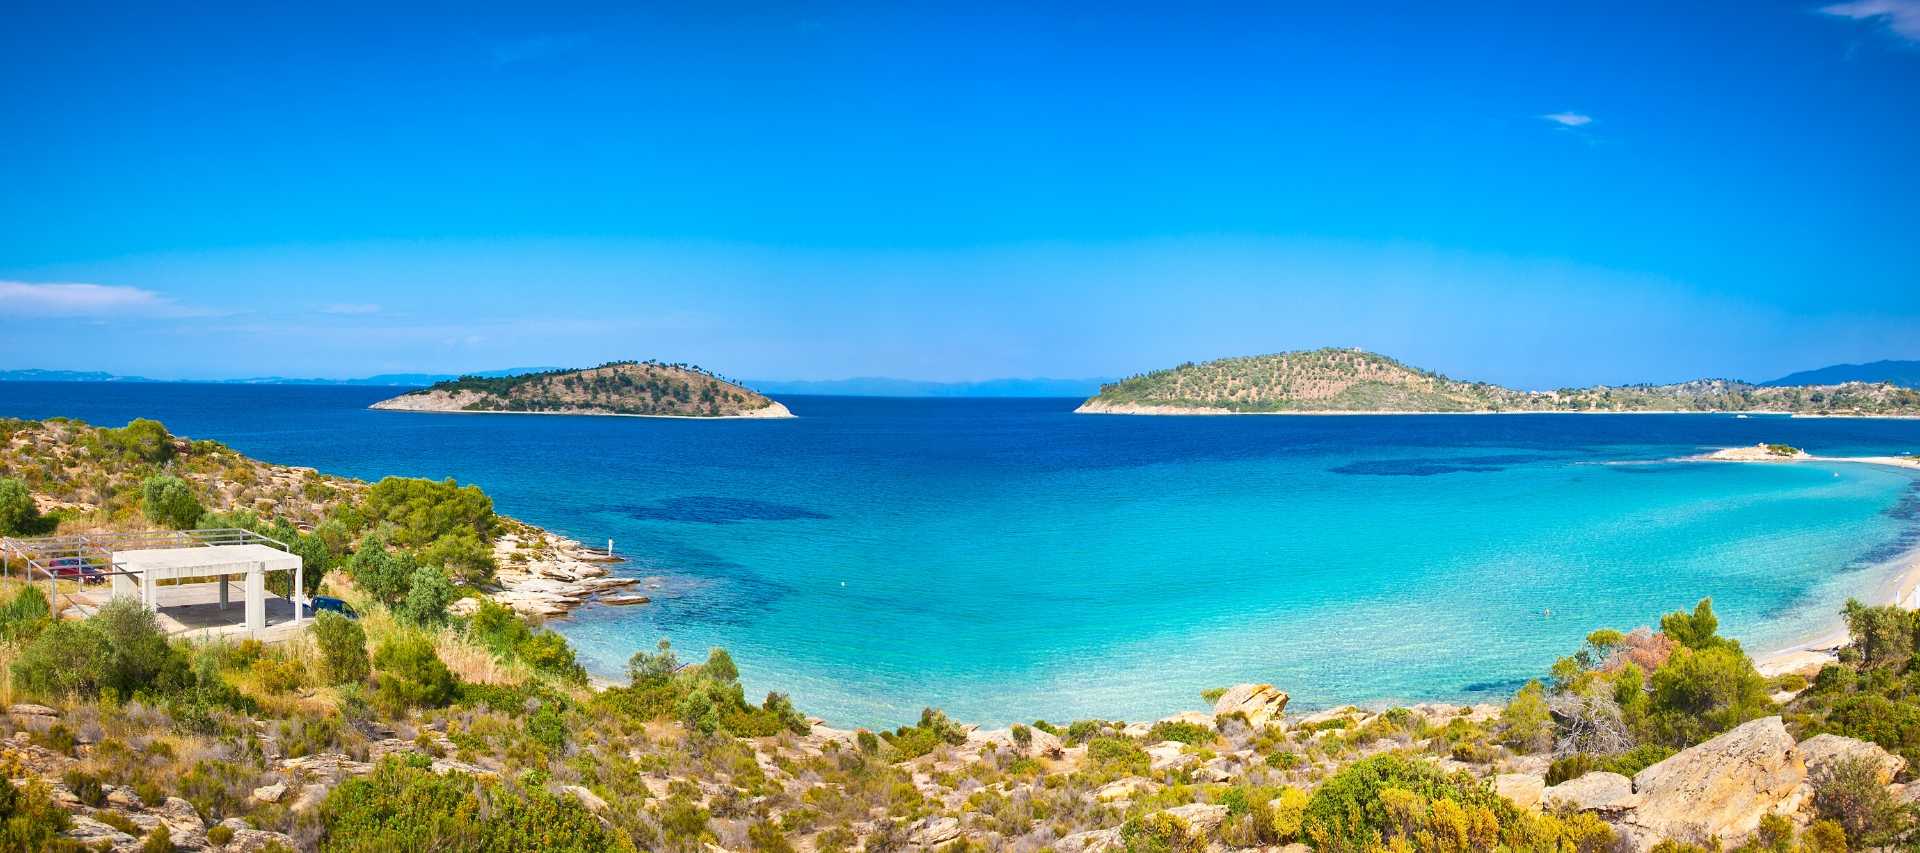 Your Guide to Halkidiki